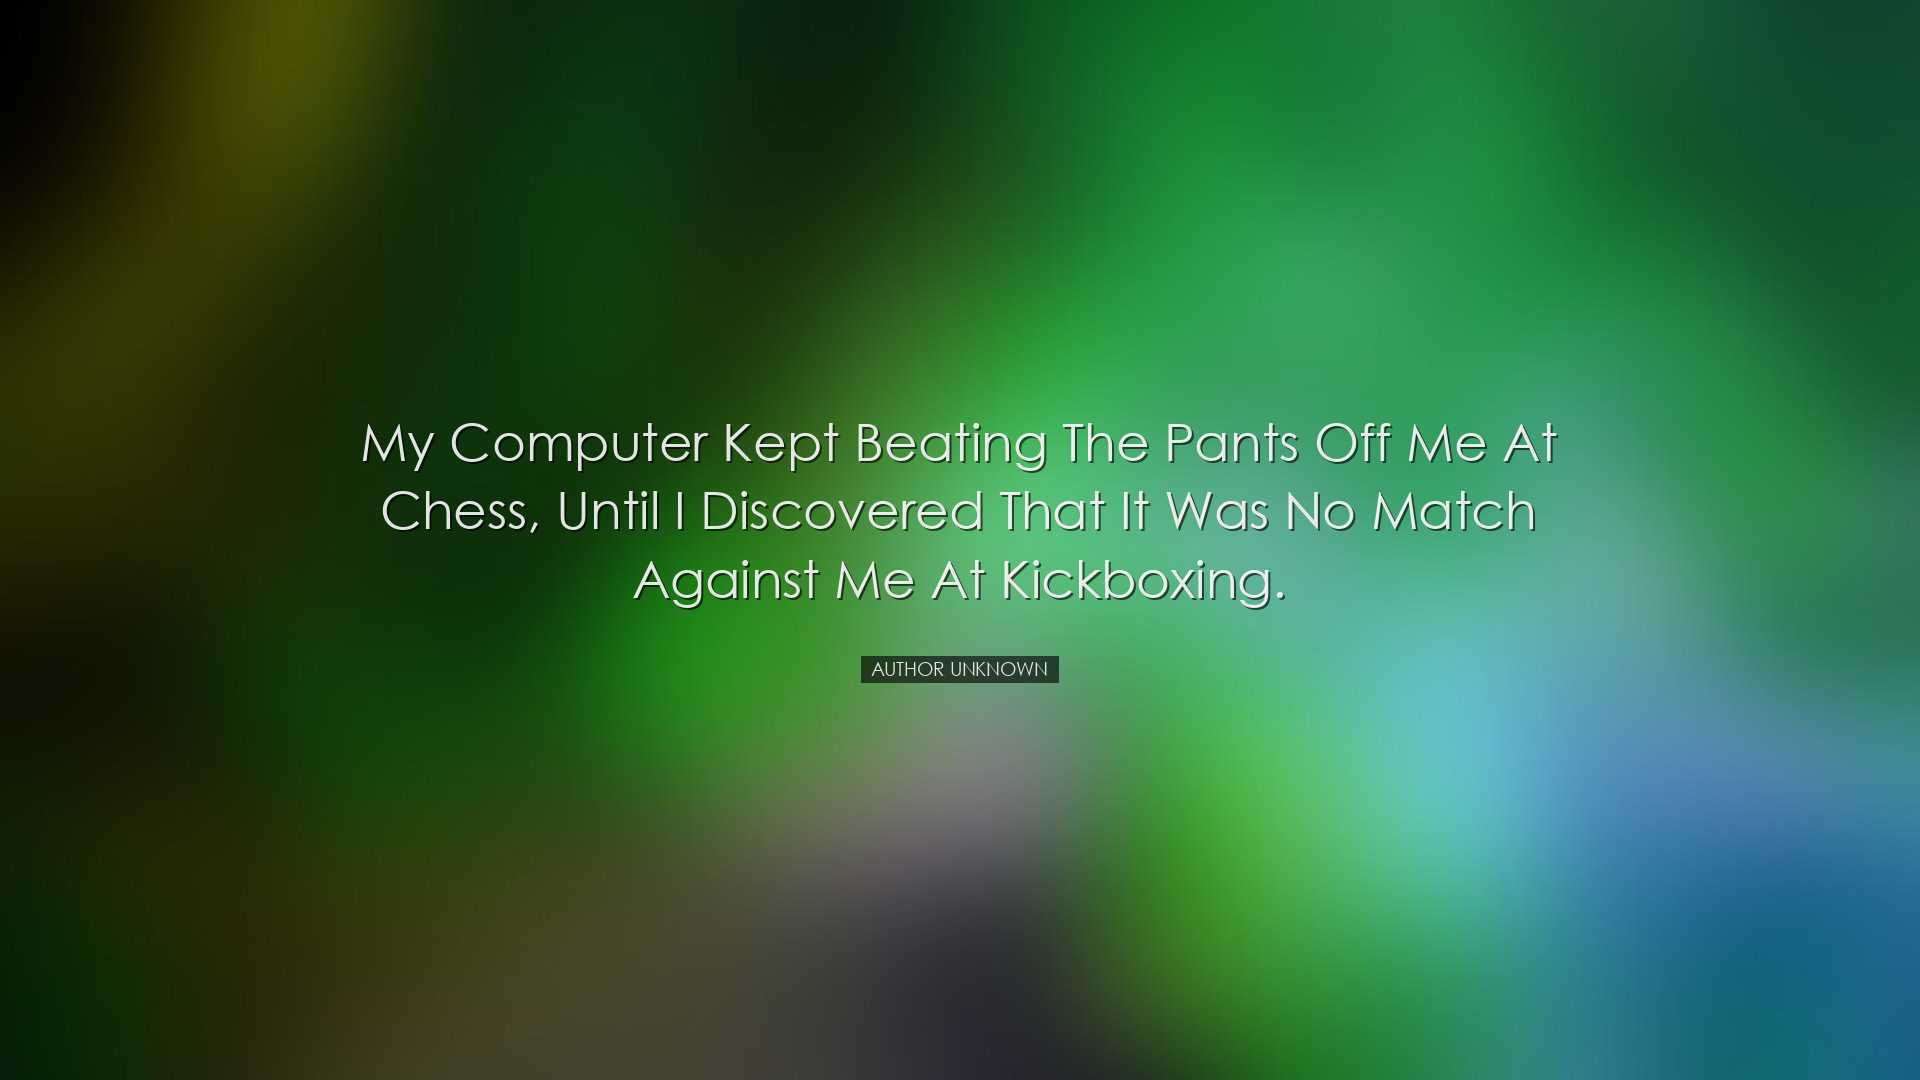 My computer kept beating the pants off me at chess, until I discov